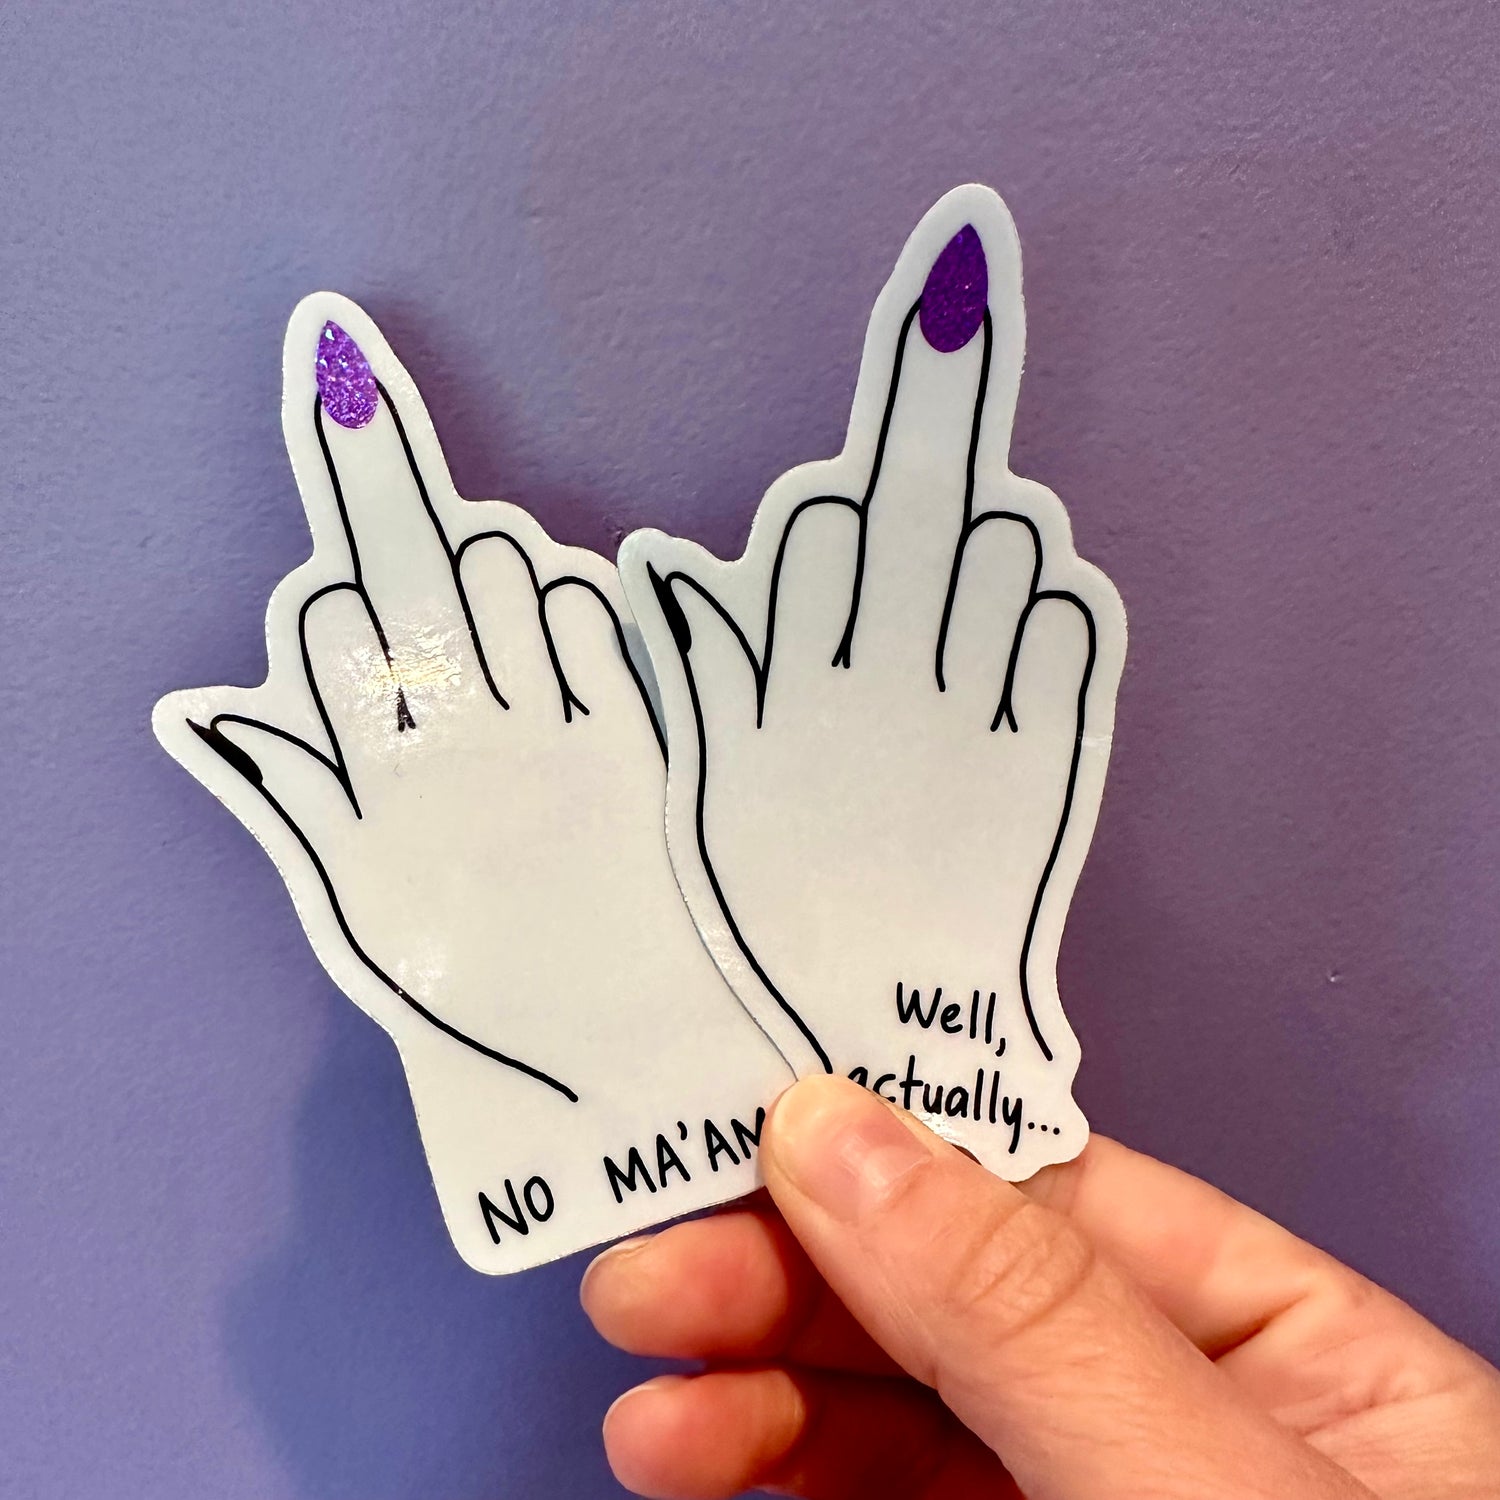 Vinyl middle finger stickers. one sticker says, "No Ma&